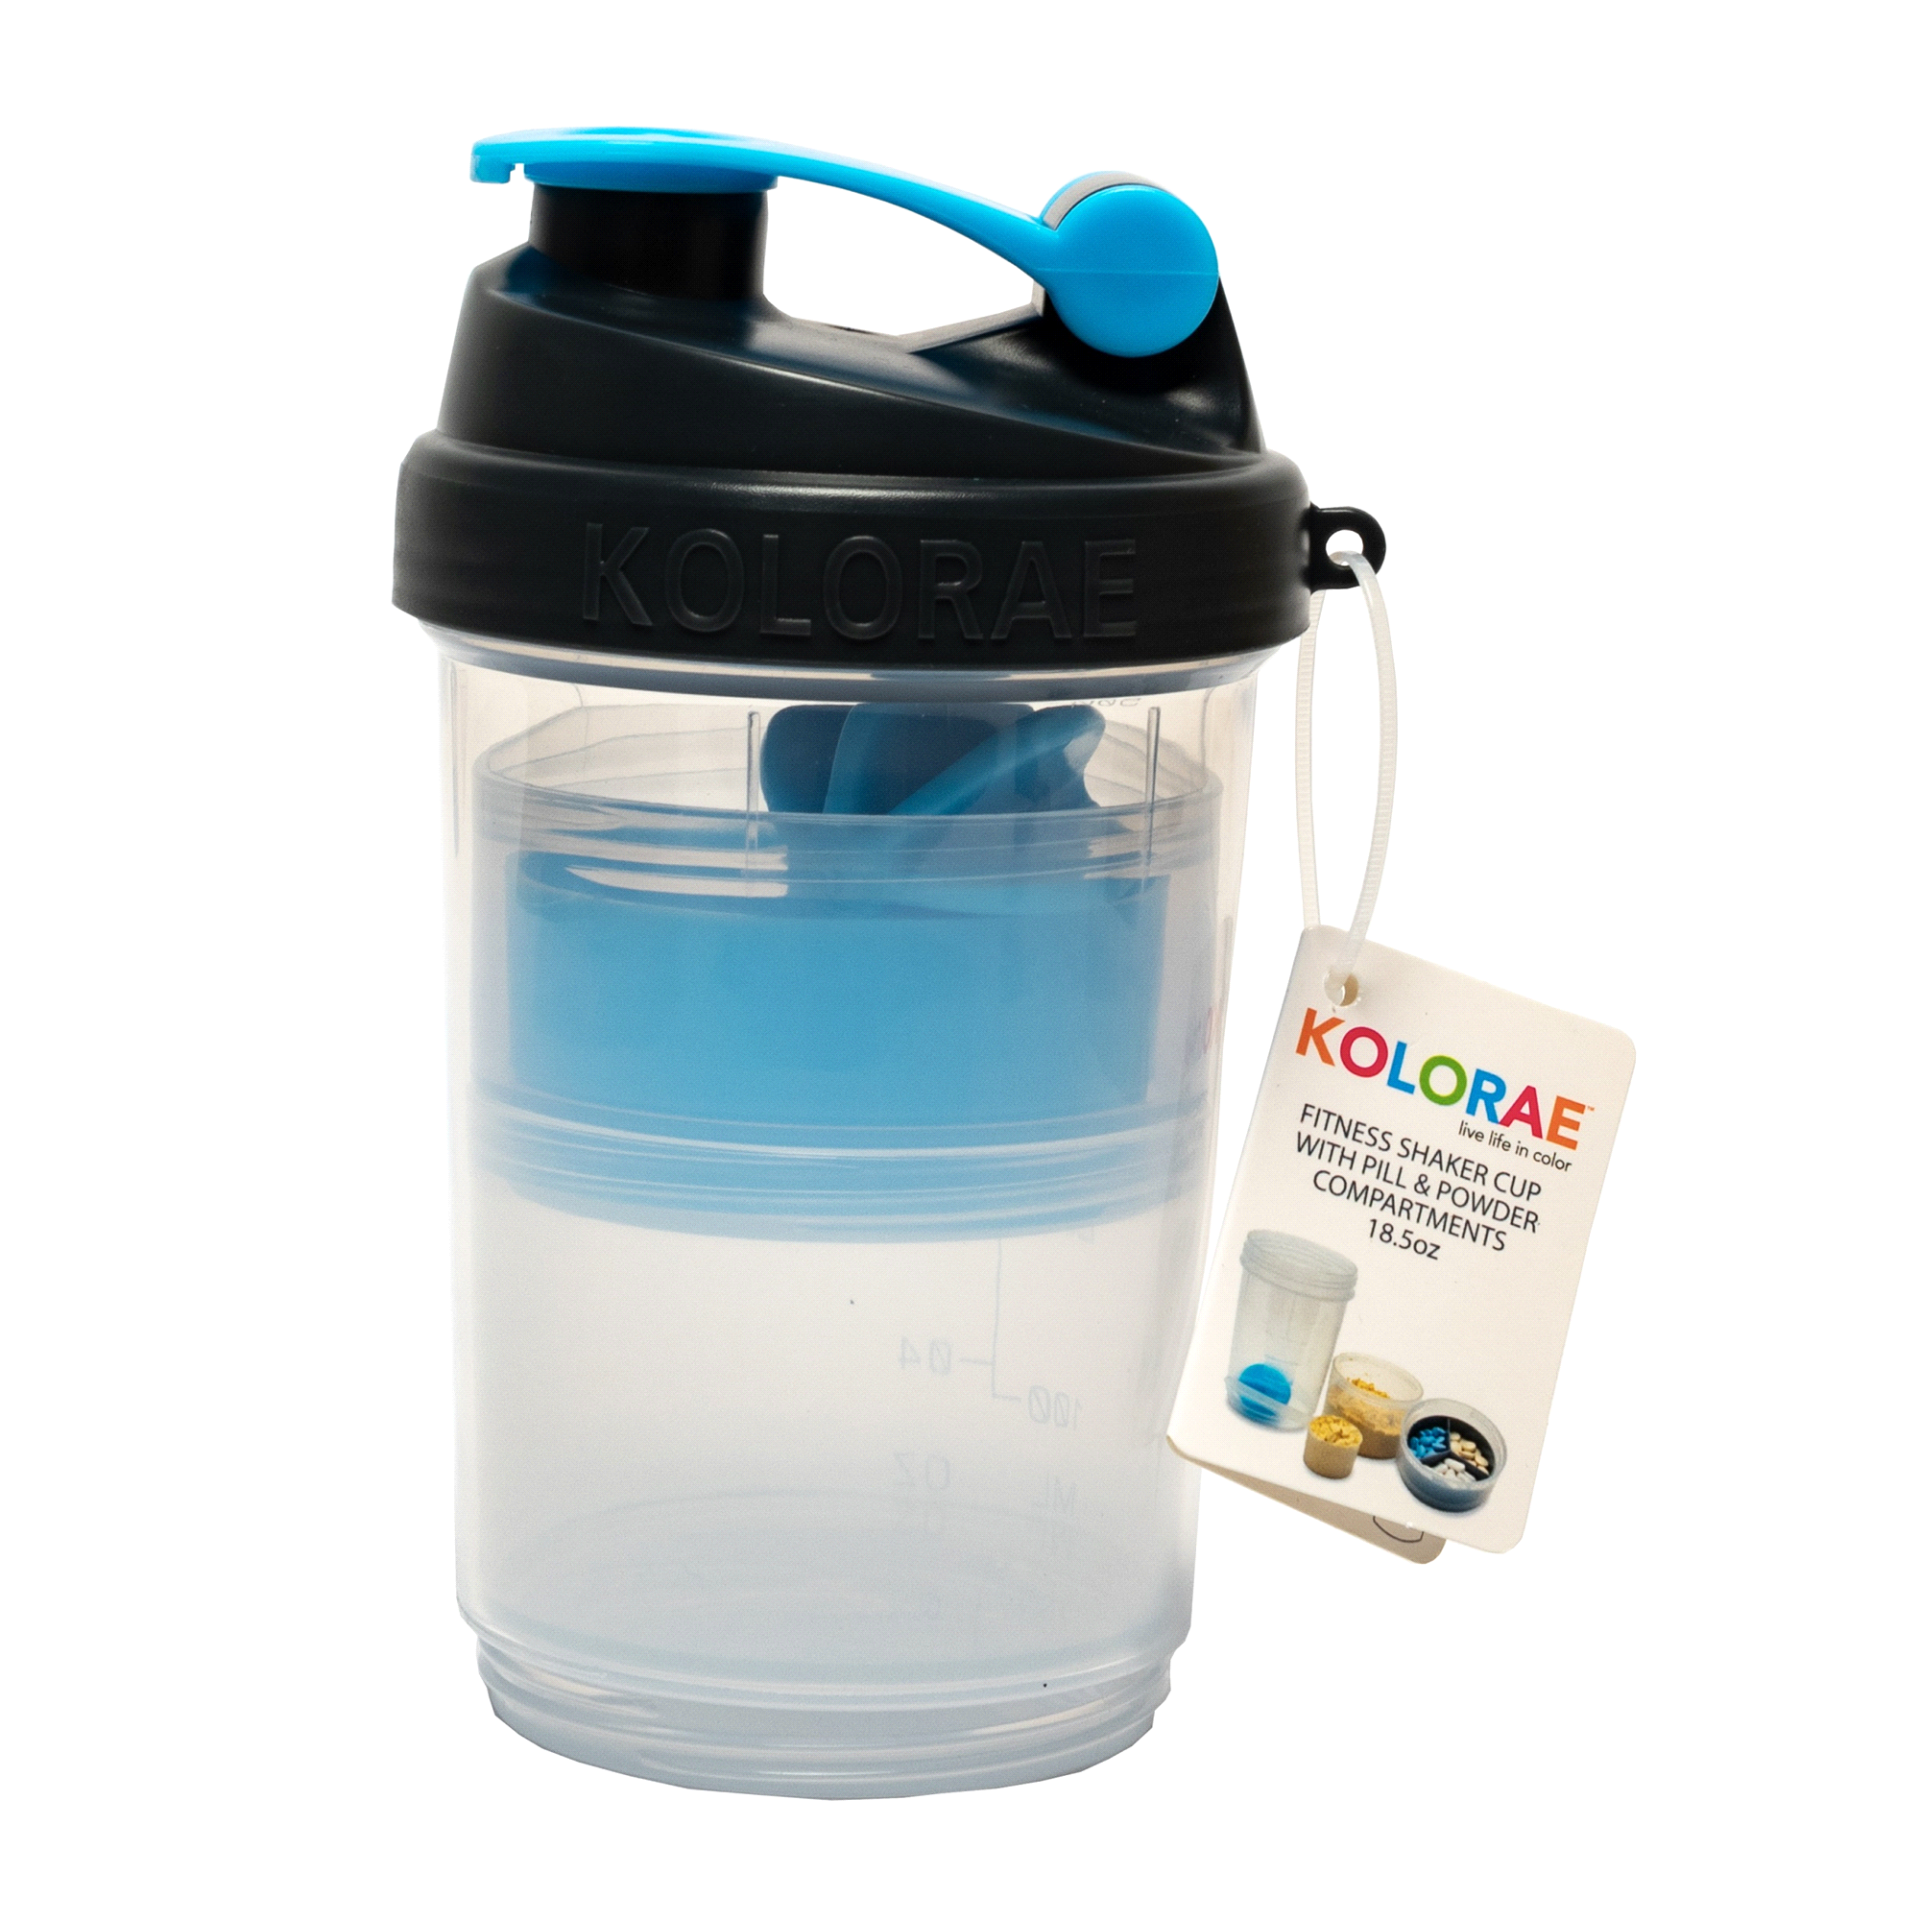 slide 1 of 1, Kolorae Fitness Shaker Cup with Pill and Powder Compartments, 18.5 oz